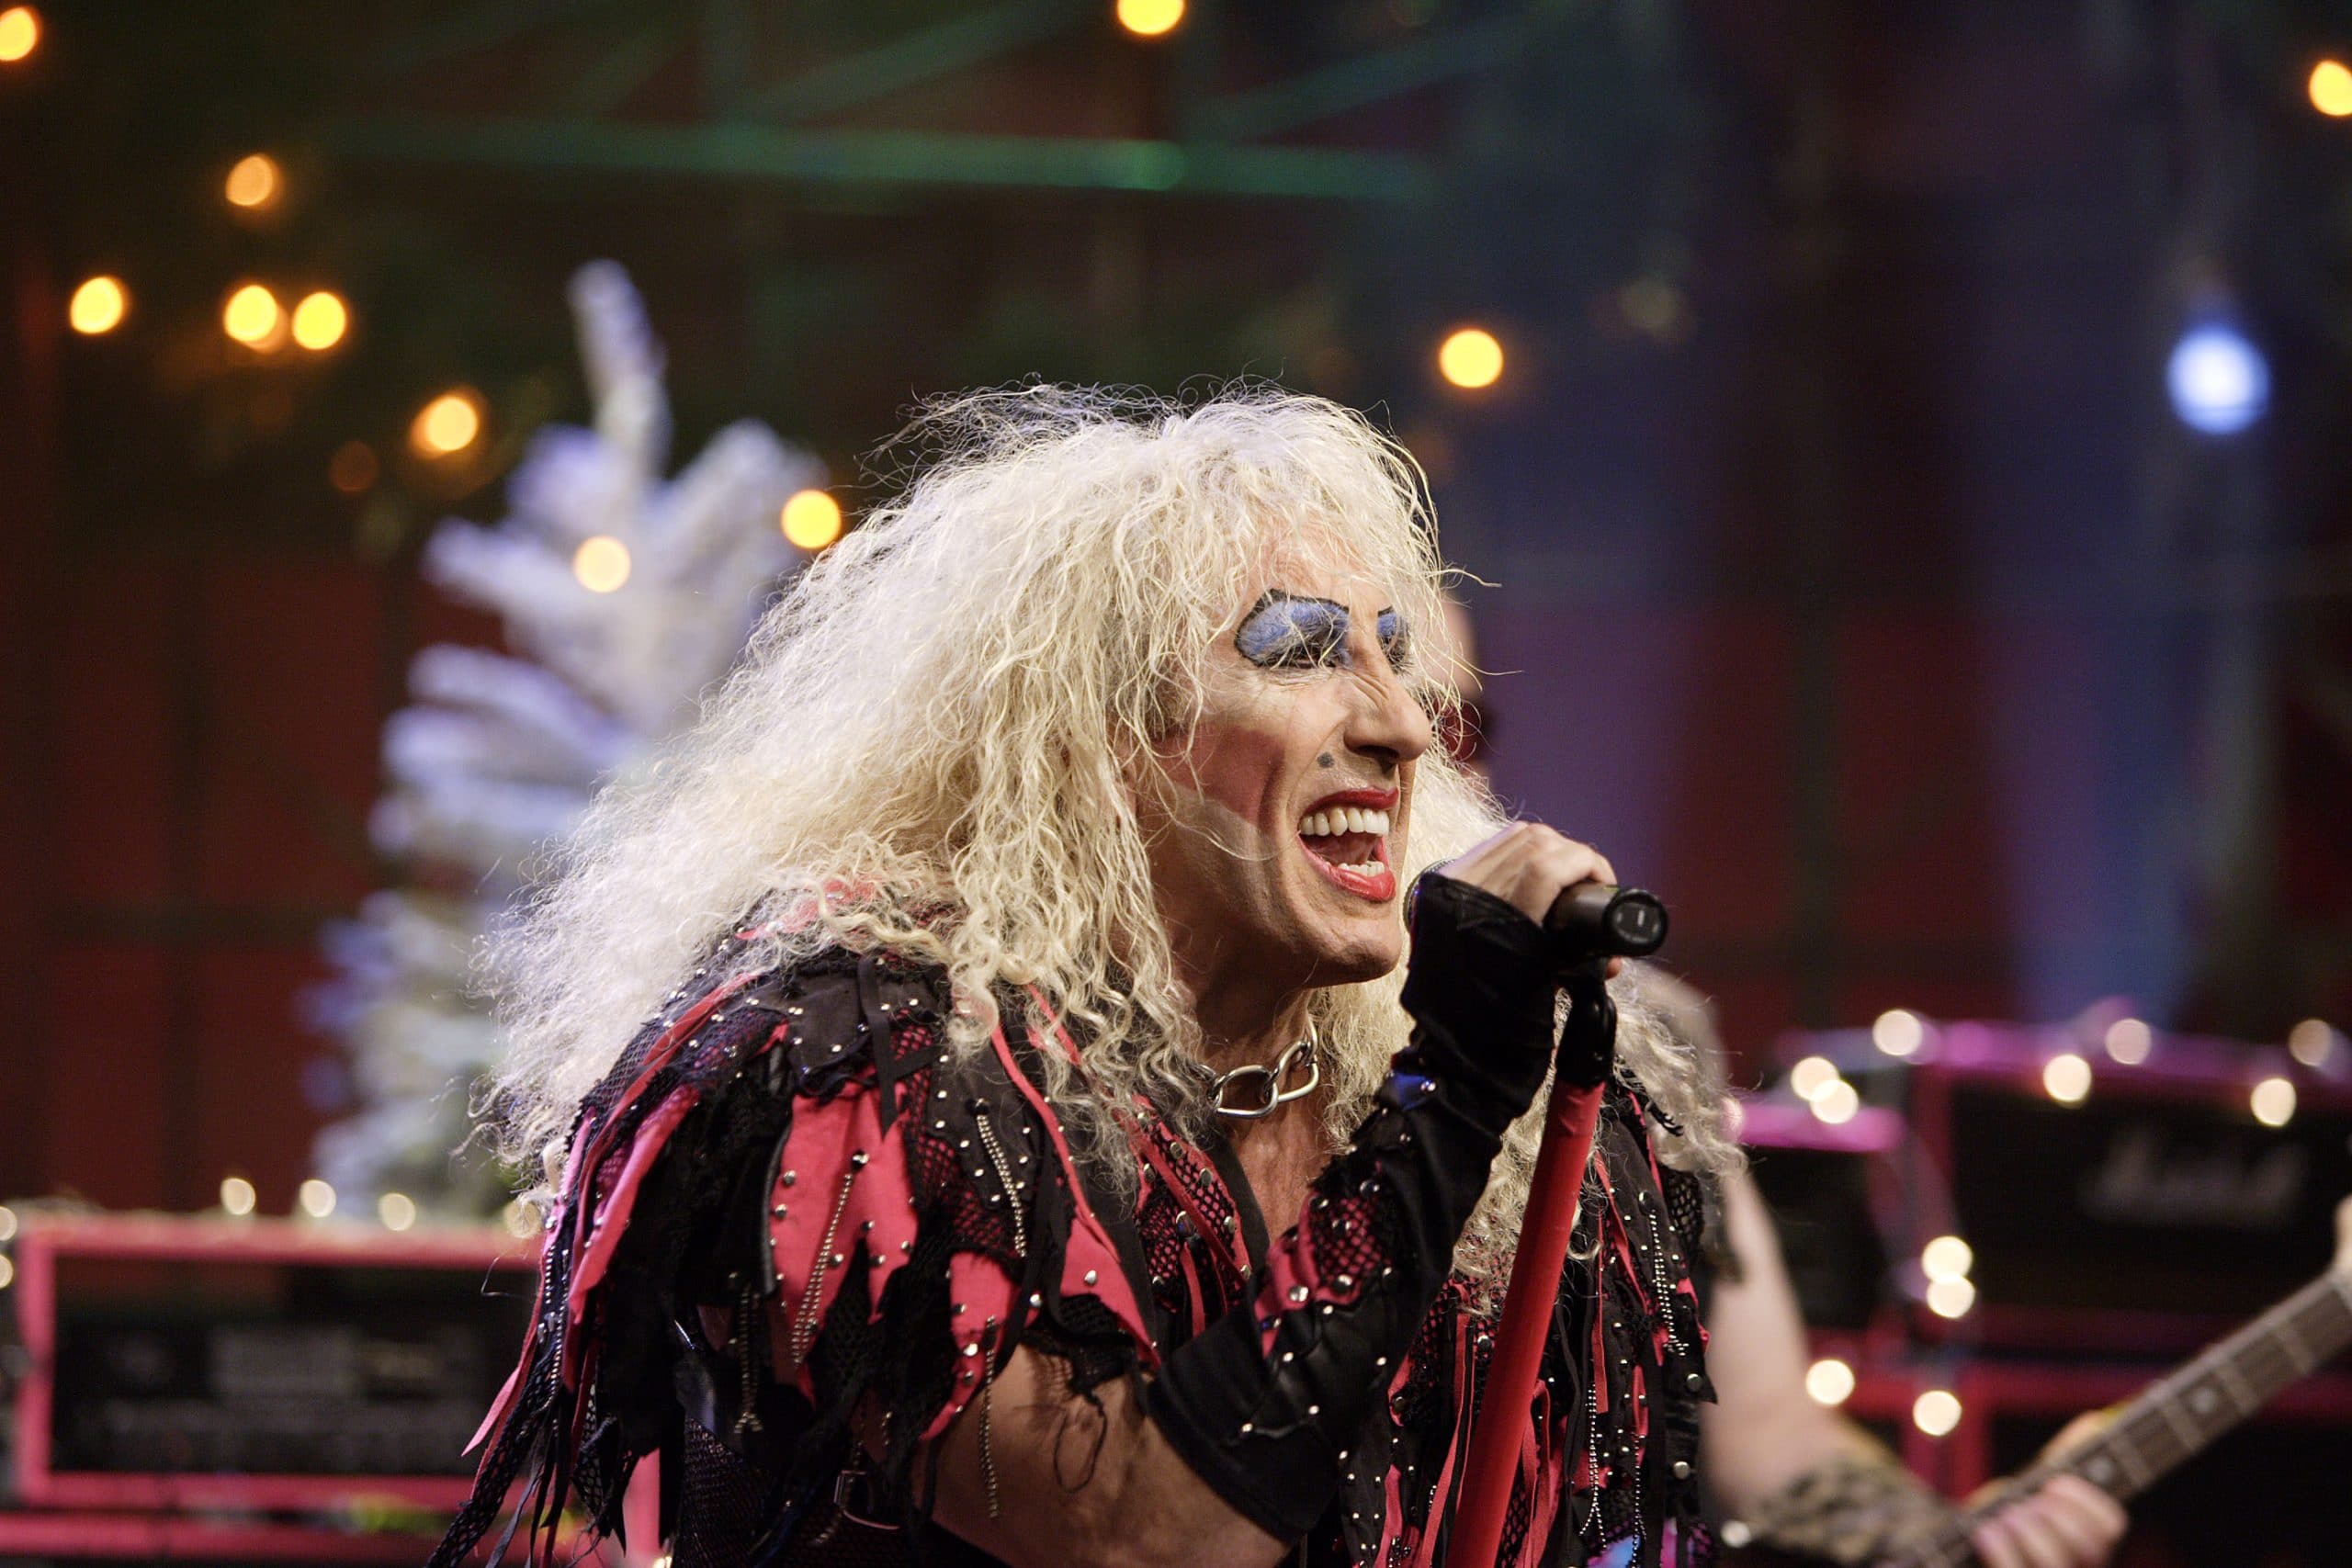 THE TONIGHT SHOW WITH JAY LENO, Dee Snider of Twisted Sister